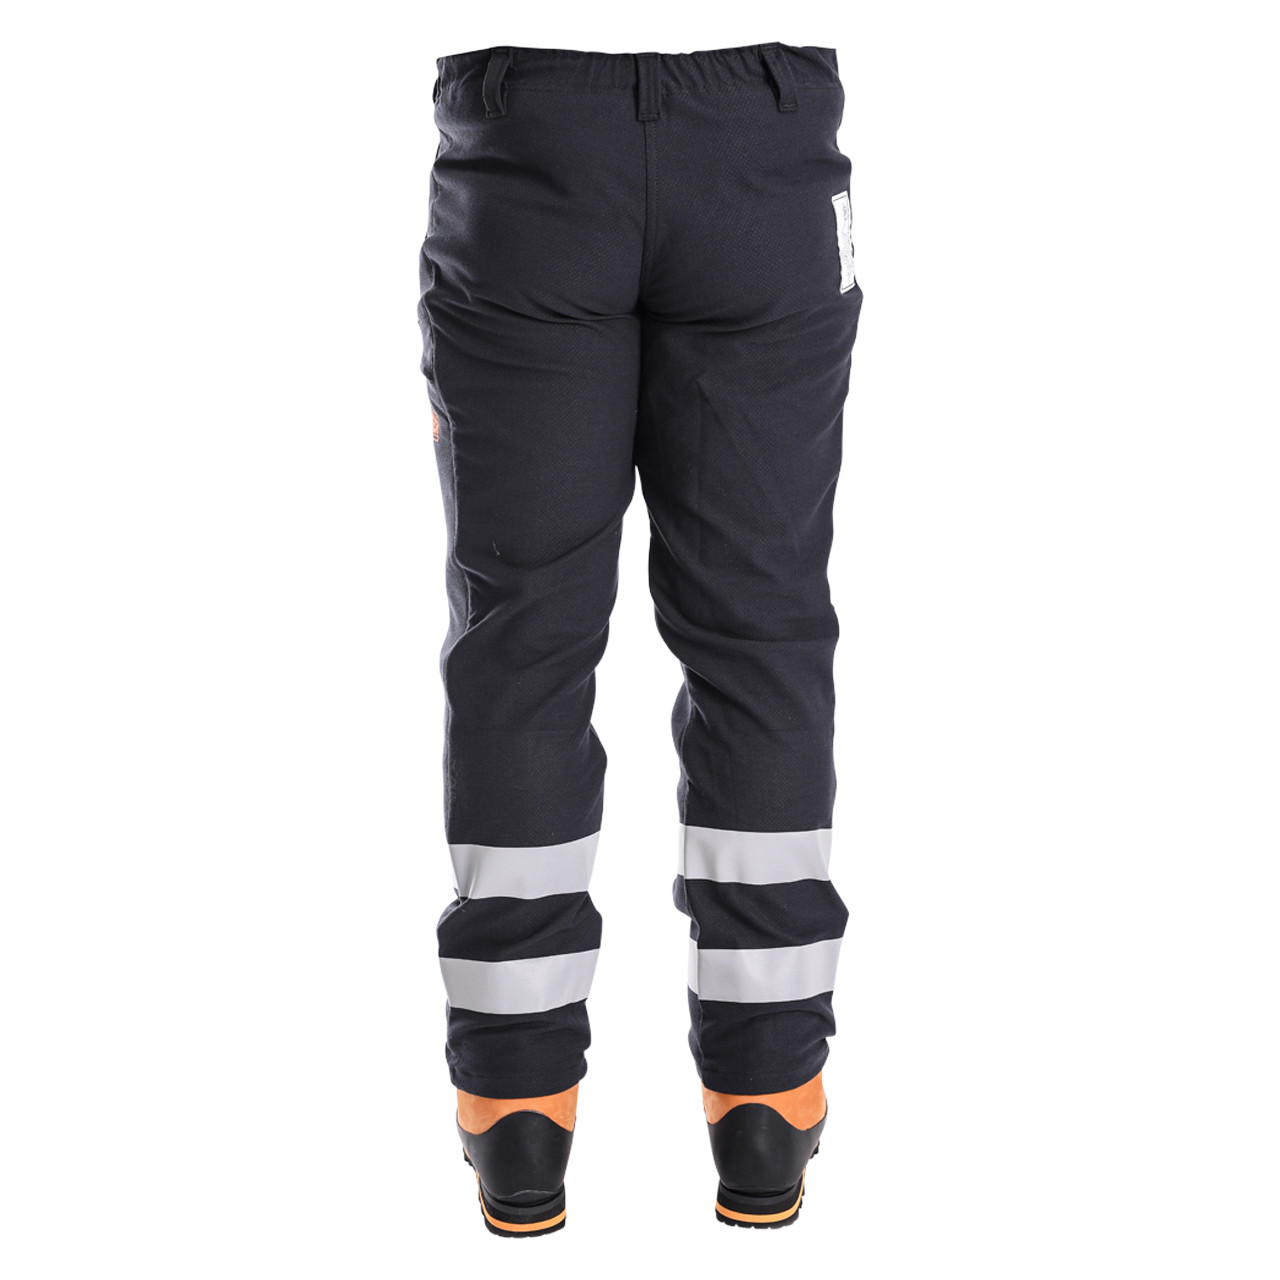 Clogger Arcmax Gen3 Arc Rated Fire Resistant Men's UL Chainsaw Pants Now  with Stretch - Clogger US